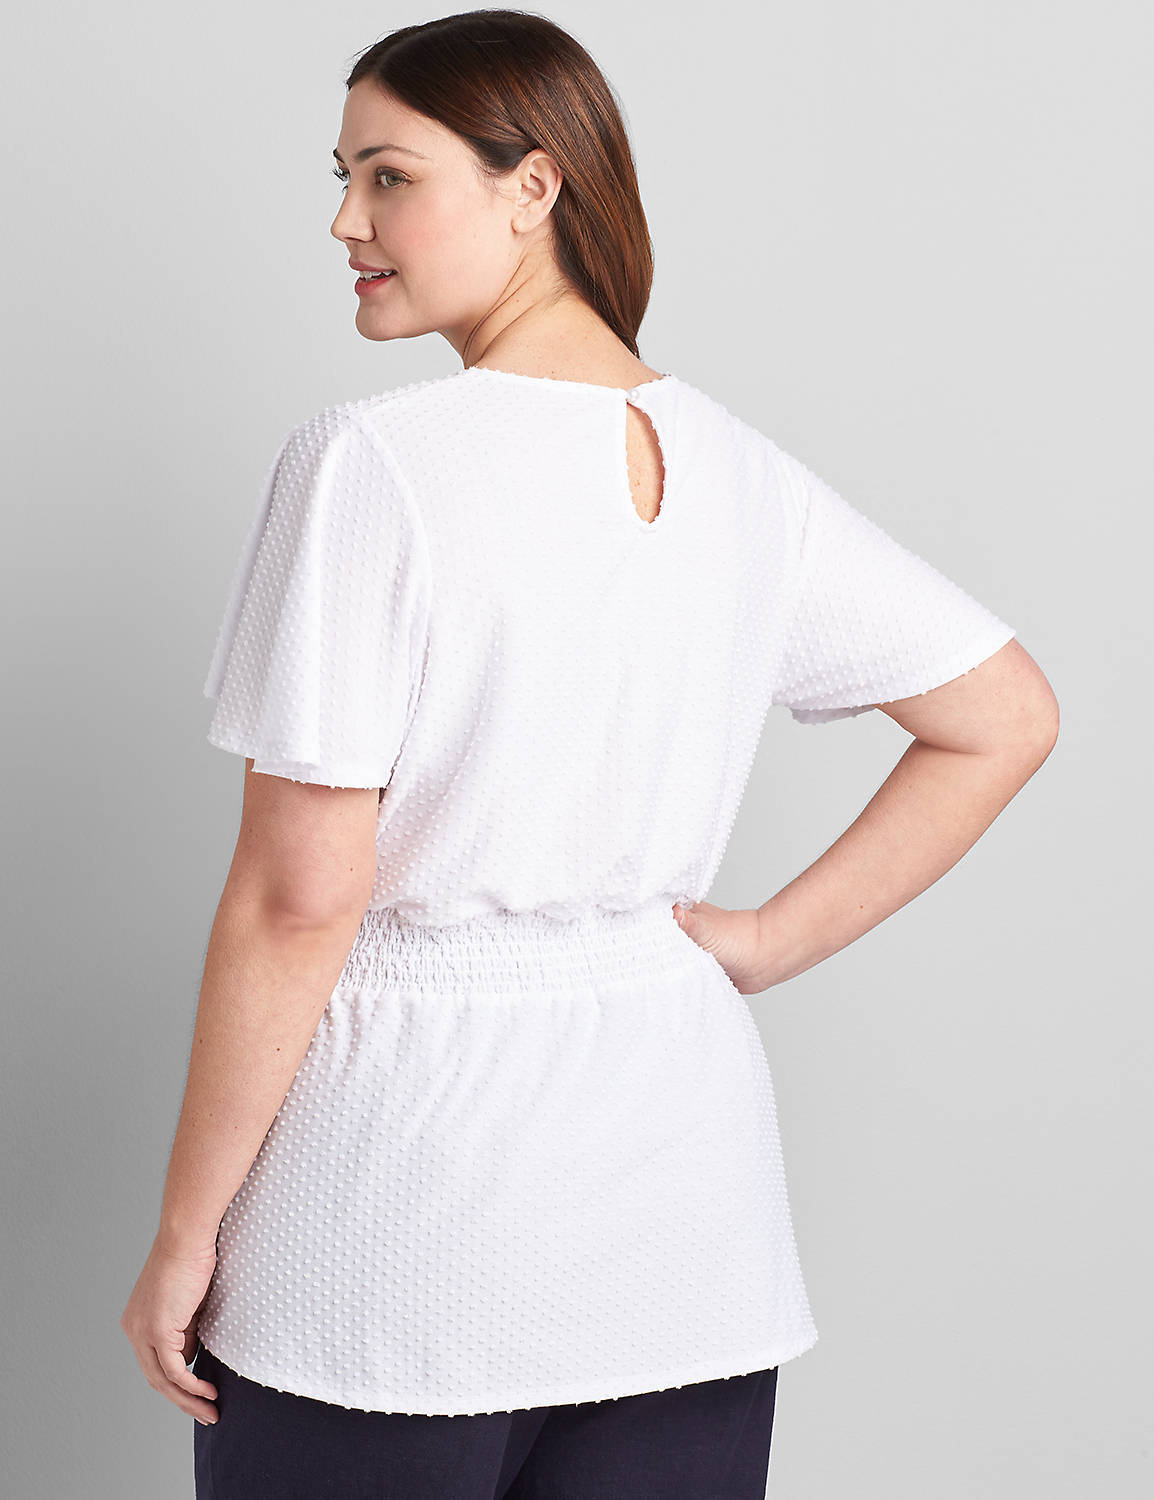 Short Sleeve Crew Neck Top With Waist Smocking In Swiss Dot 1121277:Ascena White:14/16 Product Image 2